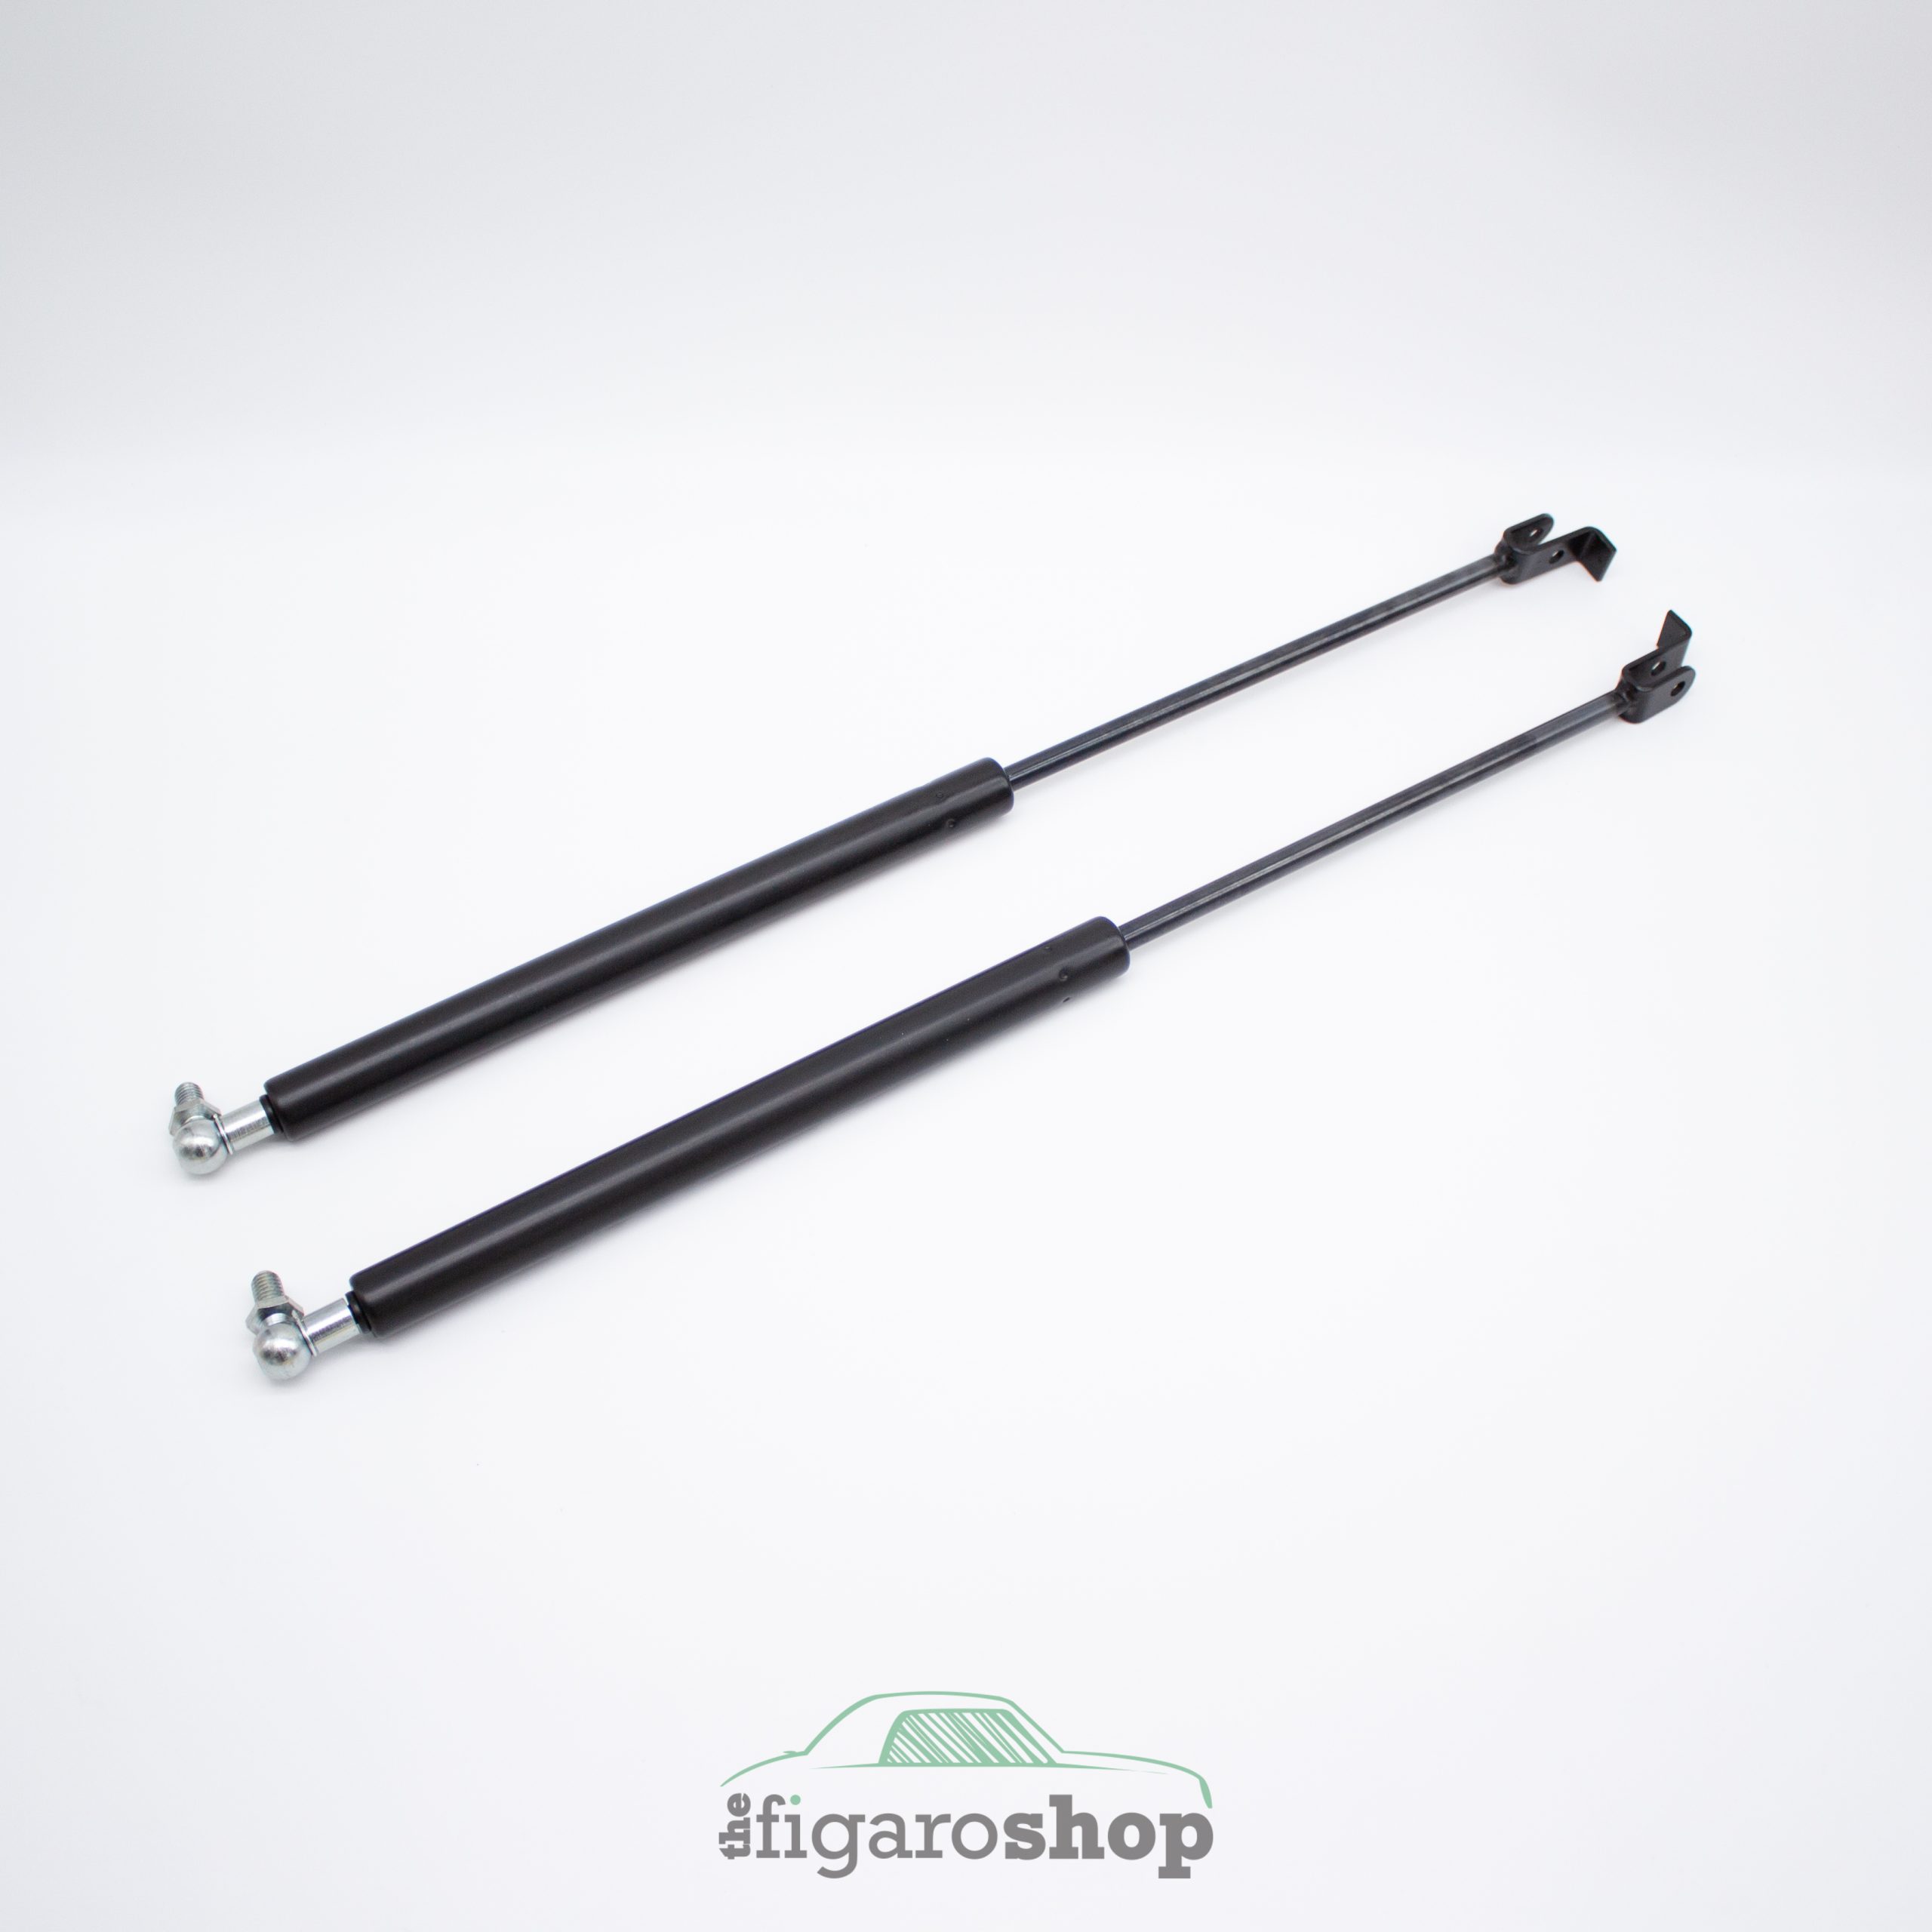 Nissan Figaro Upper Boot Gas Struts - New - The Figaro Shop (Parts